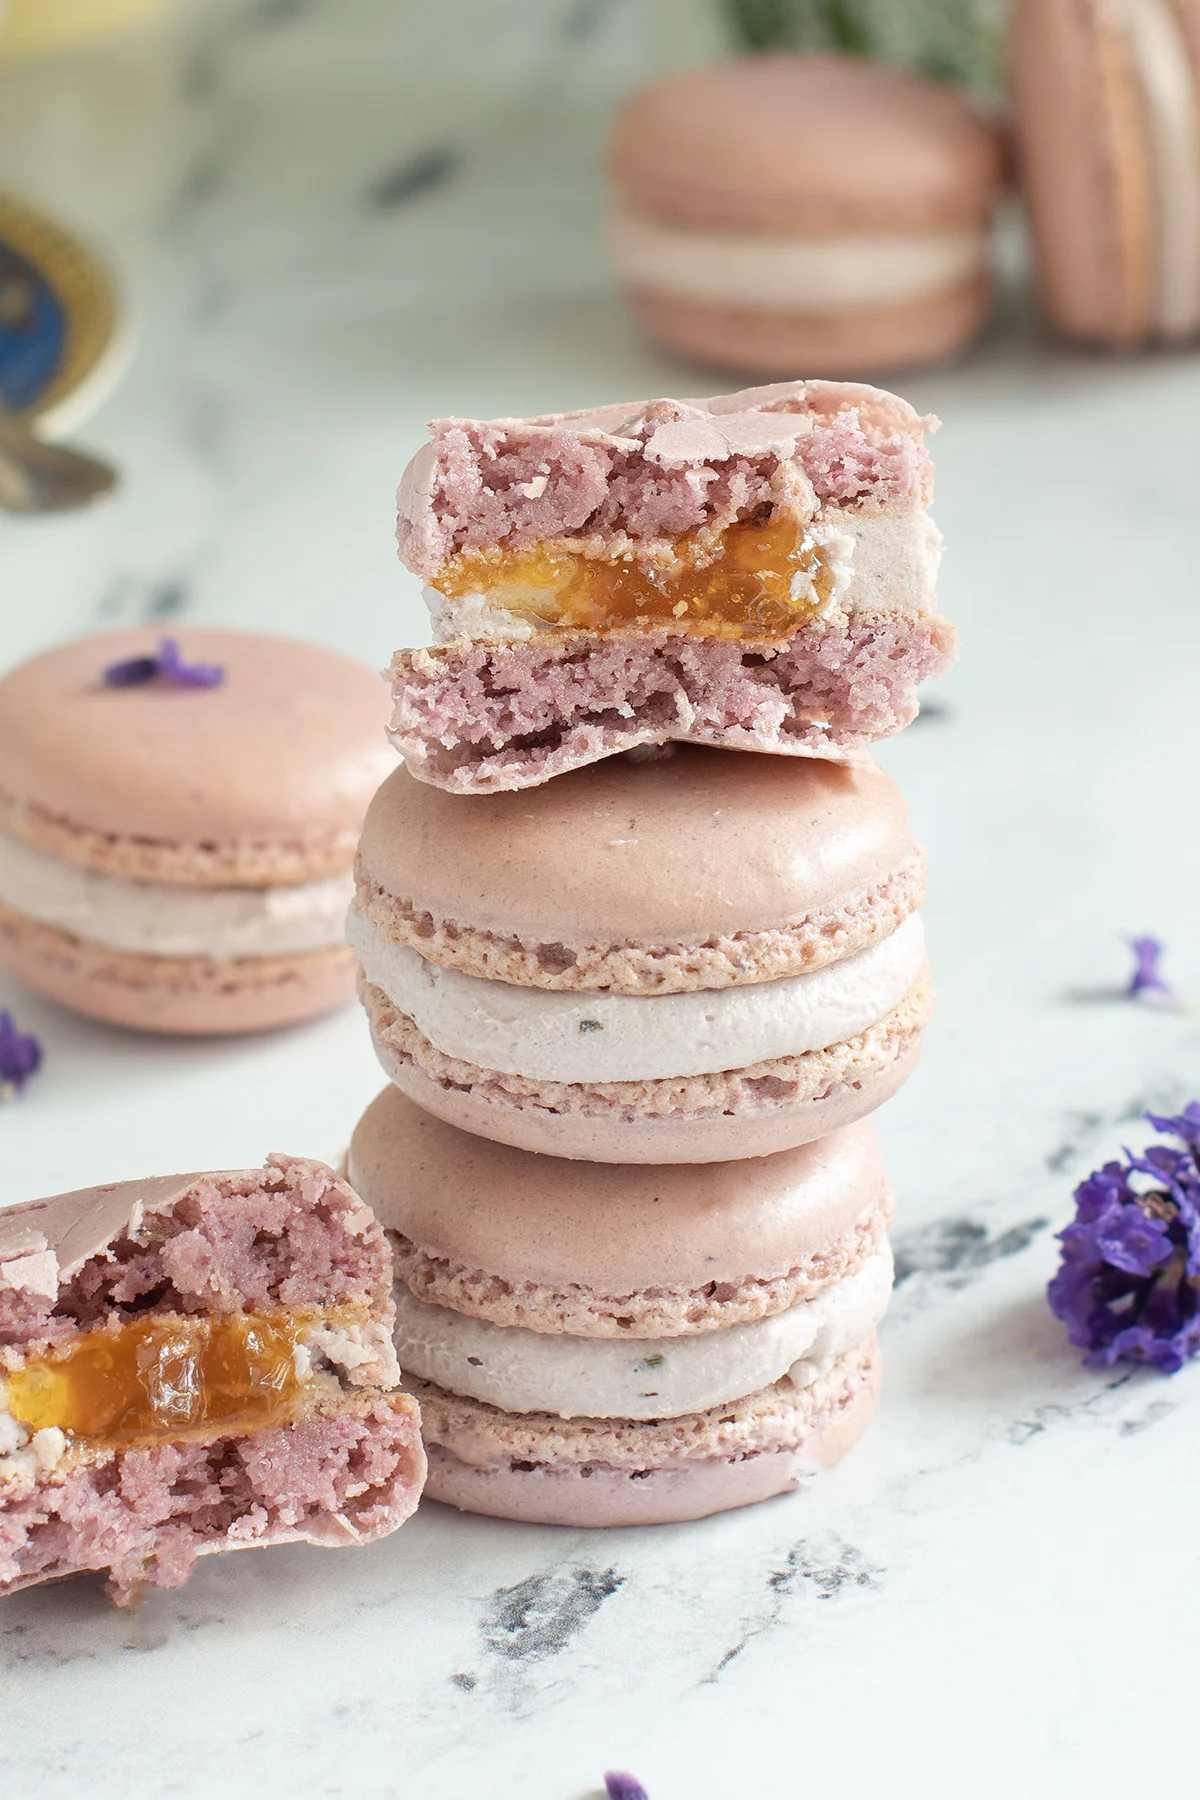 Stack of lavender macarons. Top one cut in half.